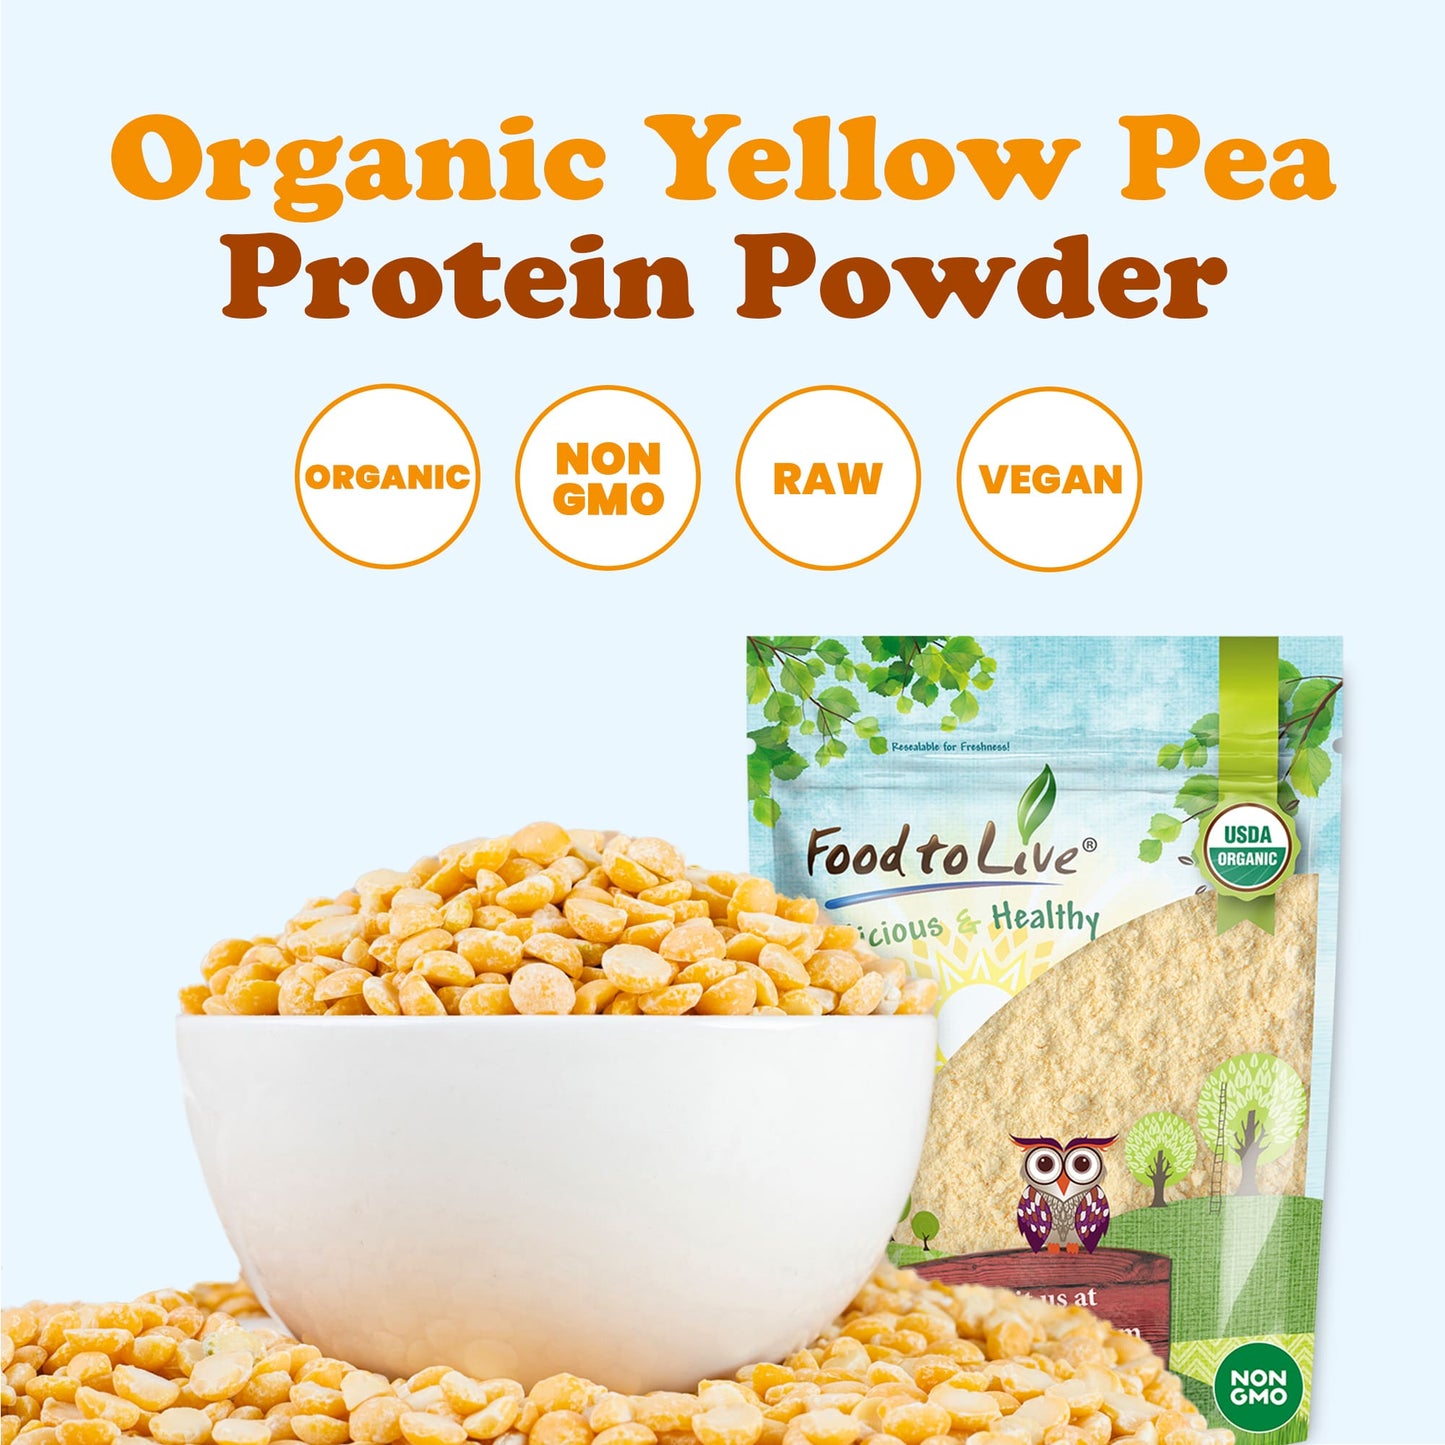 Organic Pea Protein Powder – Made from Non-GMO Yellow Peas, 80% Protein, Keto, Paleo, Vegan, Kosher, Raw, Unflavored, Unsweetened, Non-Irradiated. Bulk. Great for Baking and Smoothies